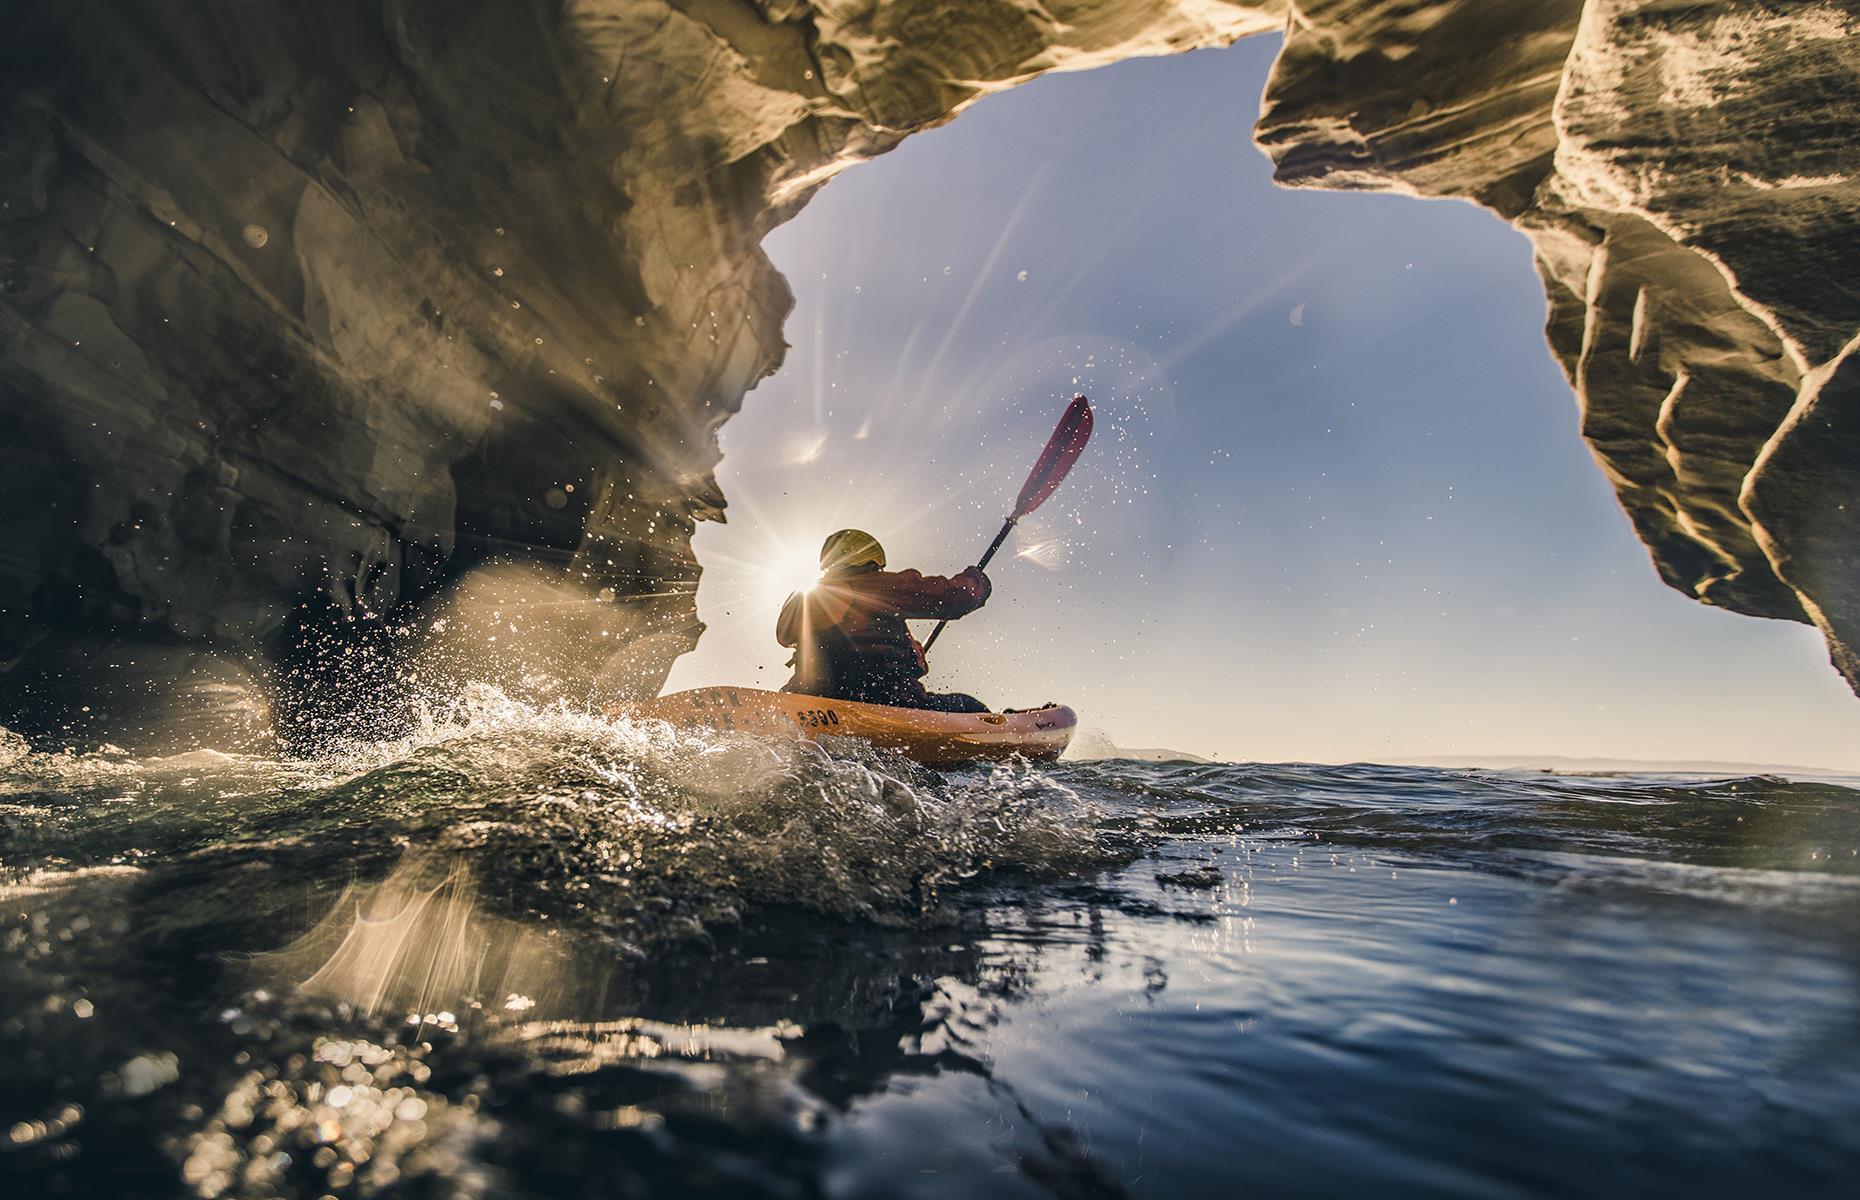 <p>The San Luis Obispo County stretch of the Californian coast is home to a world of grottoes, arches, rock gardens and caves. It's possible to explore their watery depths on <a href="https://centralcoastkayaks.com/">an excursion</a> – some of the caves run up to 30-feet (9m) deep. There are seals, otters and dolphins around too.</p>